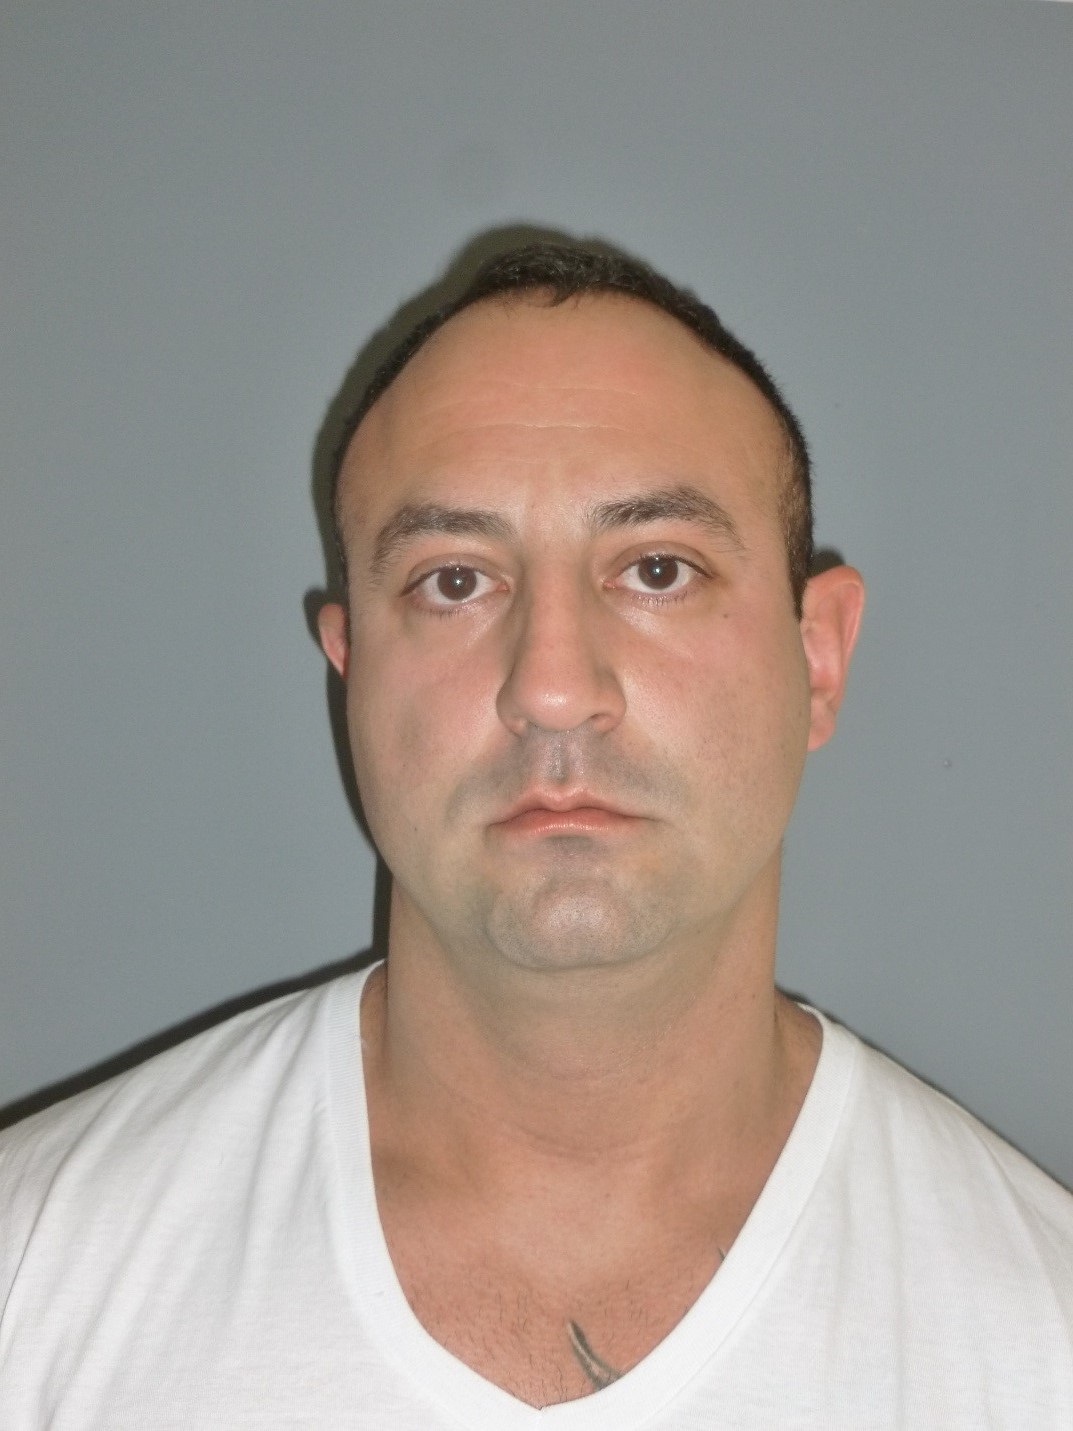 NY State Trooper arrested for theft from Sheriff's Office1073 x 1431